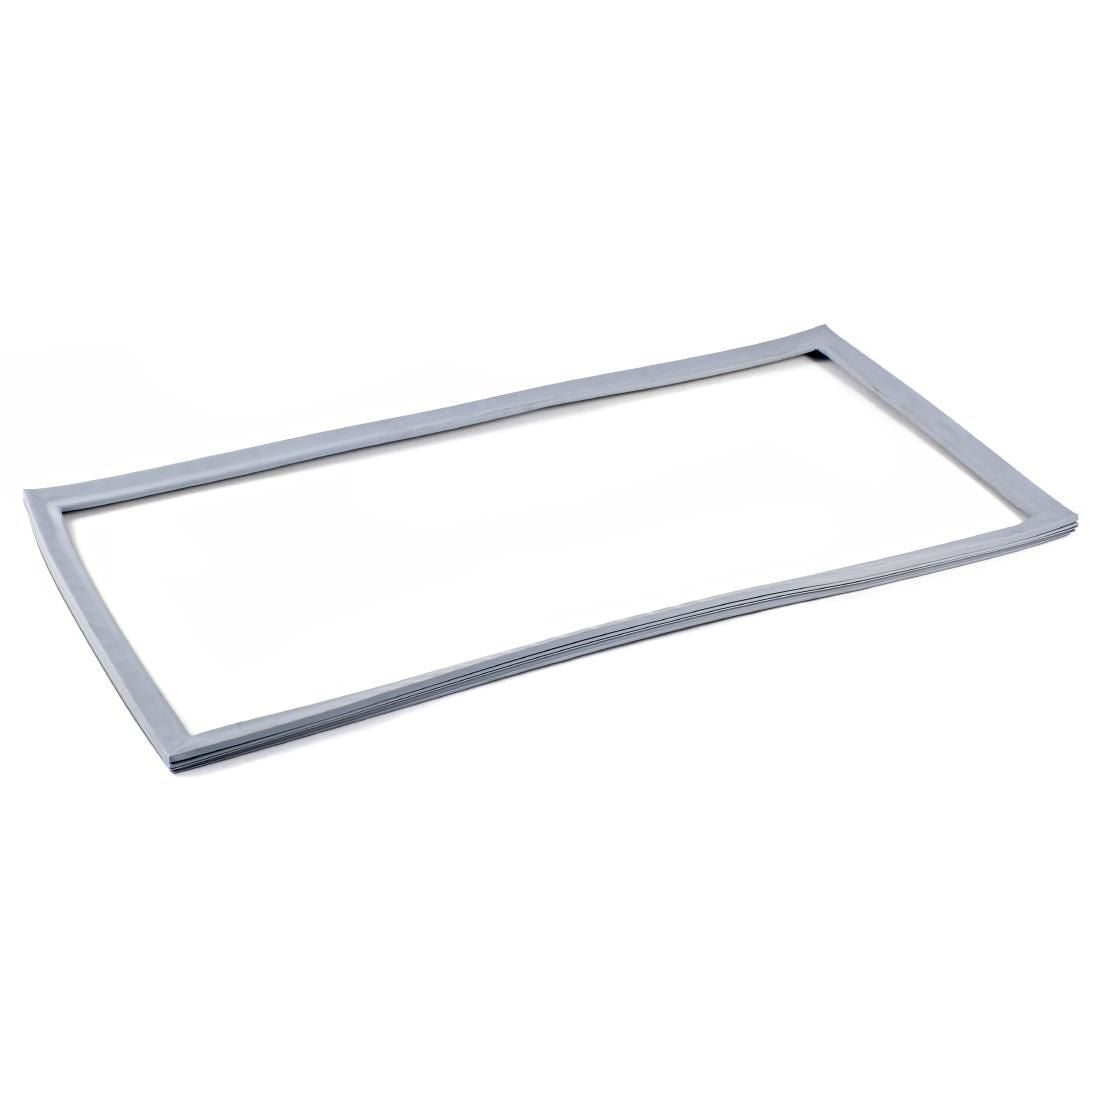 AE590 Zoin Gasket for Storage Door ref R053 1 JD Catering Equipment Solutions Ltd